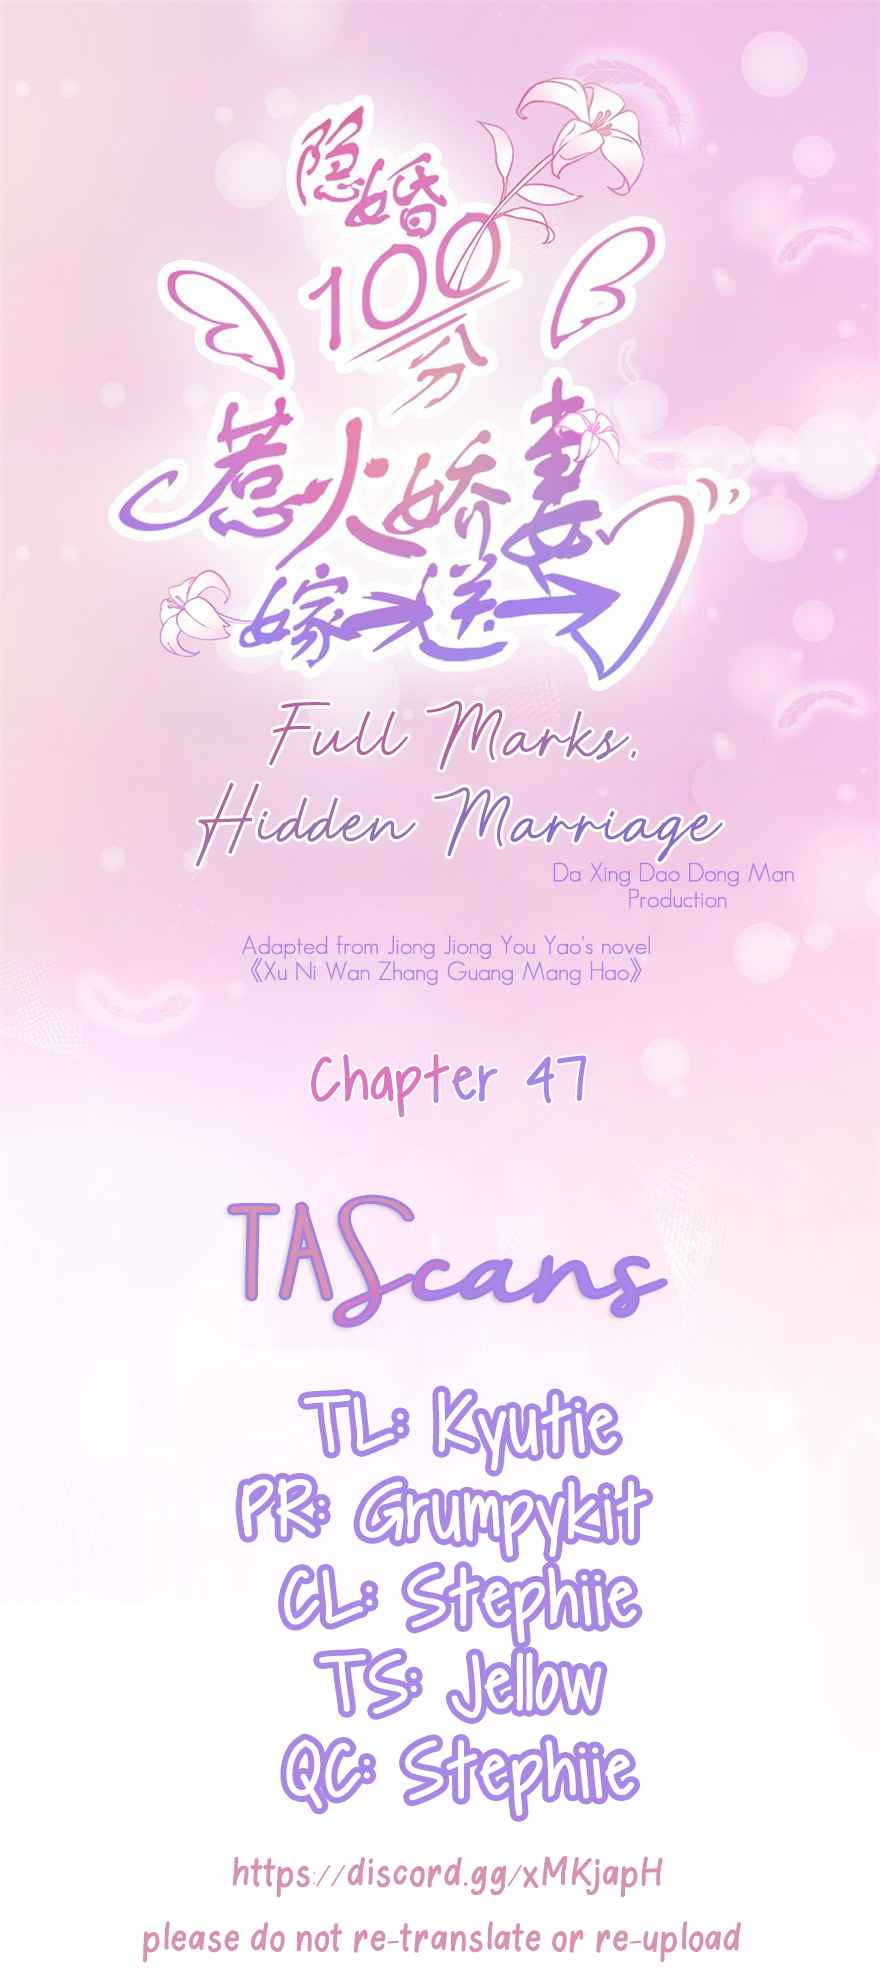 Full Marks, Hidden Marriage Ch. 47 Don't wear clothes!